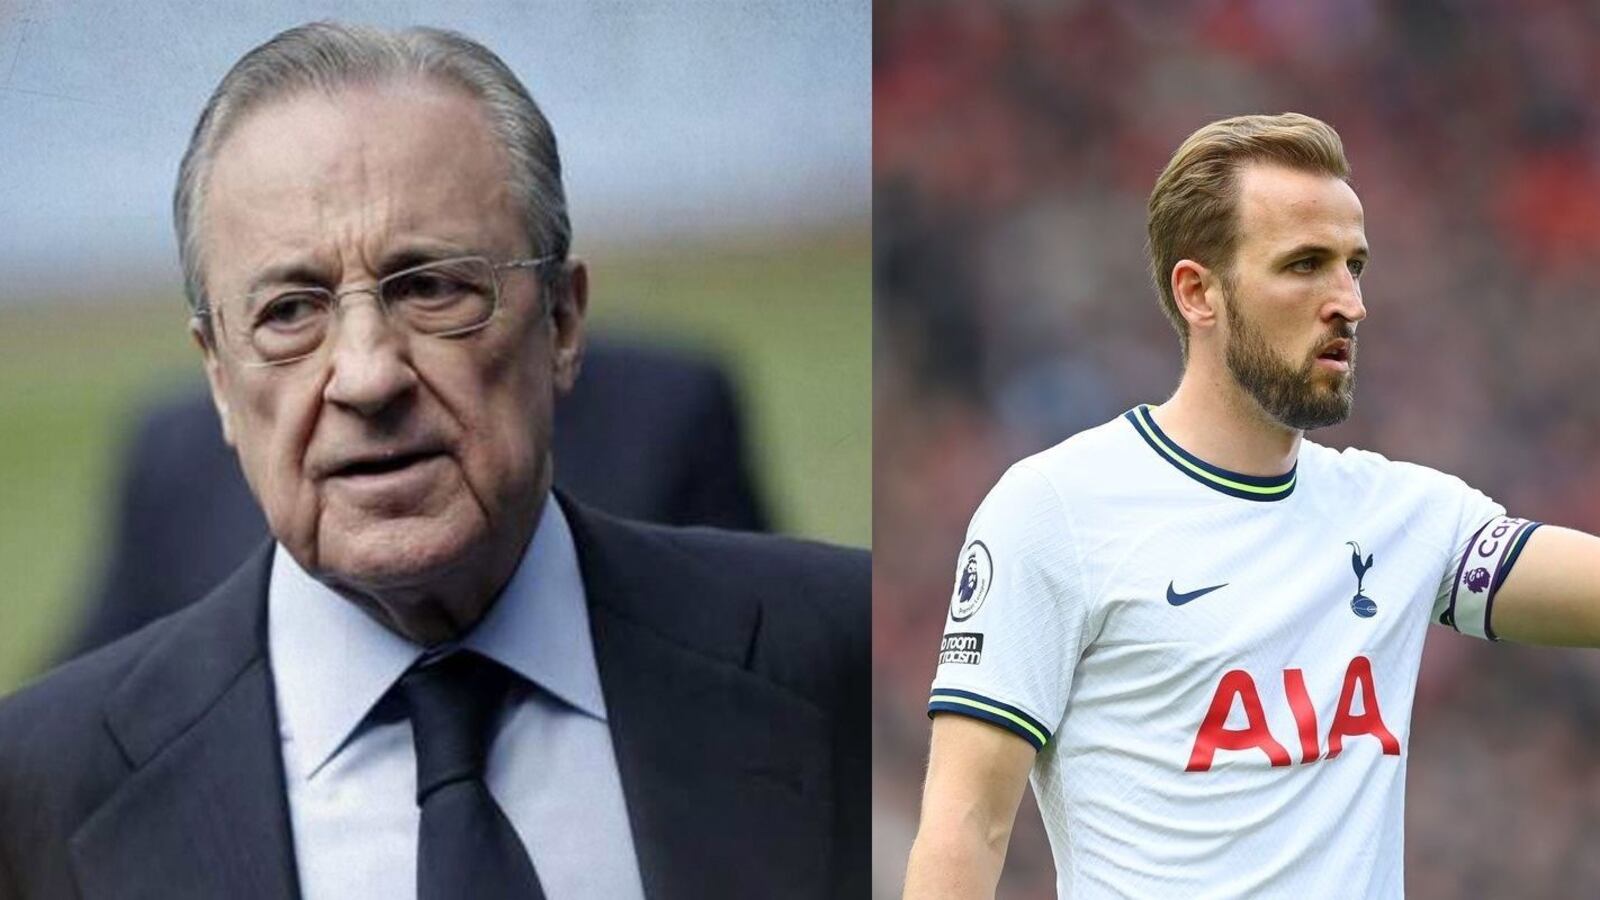 Florentino's incredible reaction to the 200 million Tottenham asks for Kane